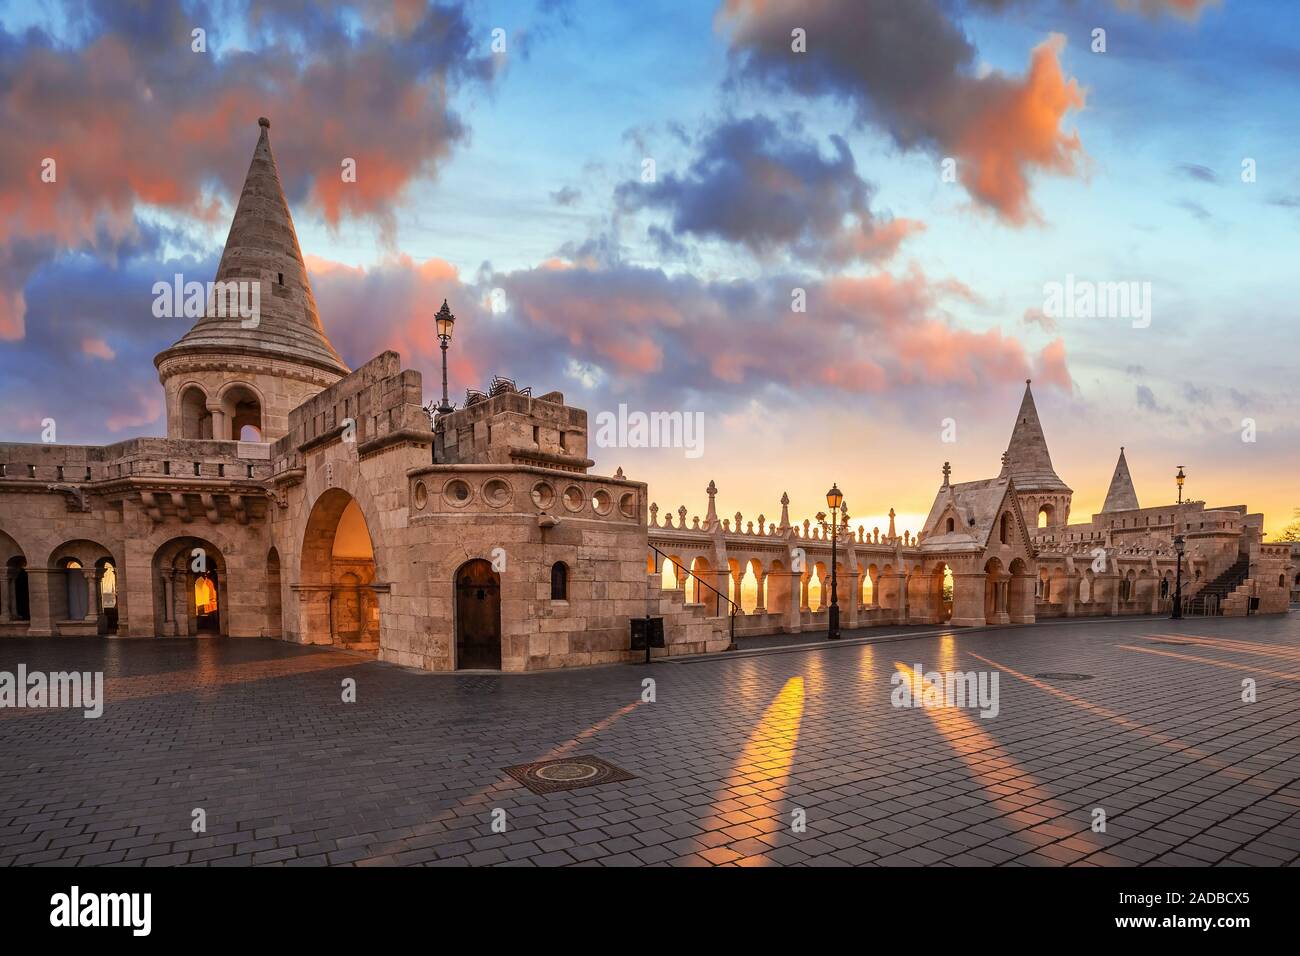 Budapest, Hungary - Beautiful autumn sunrise at Castle district and Fisherman's Bastion with warm sunlight and orange and blue sky and clouds Stock Photo